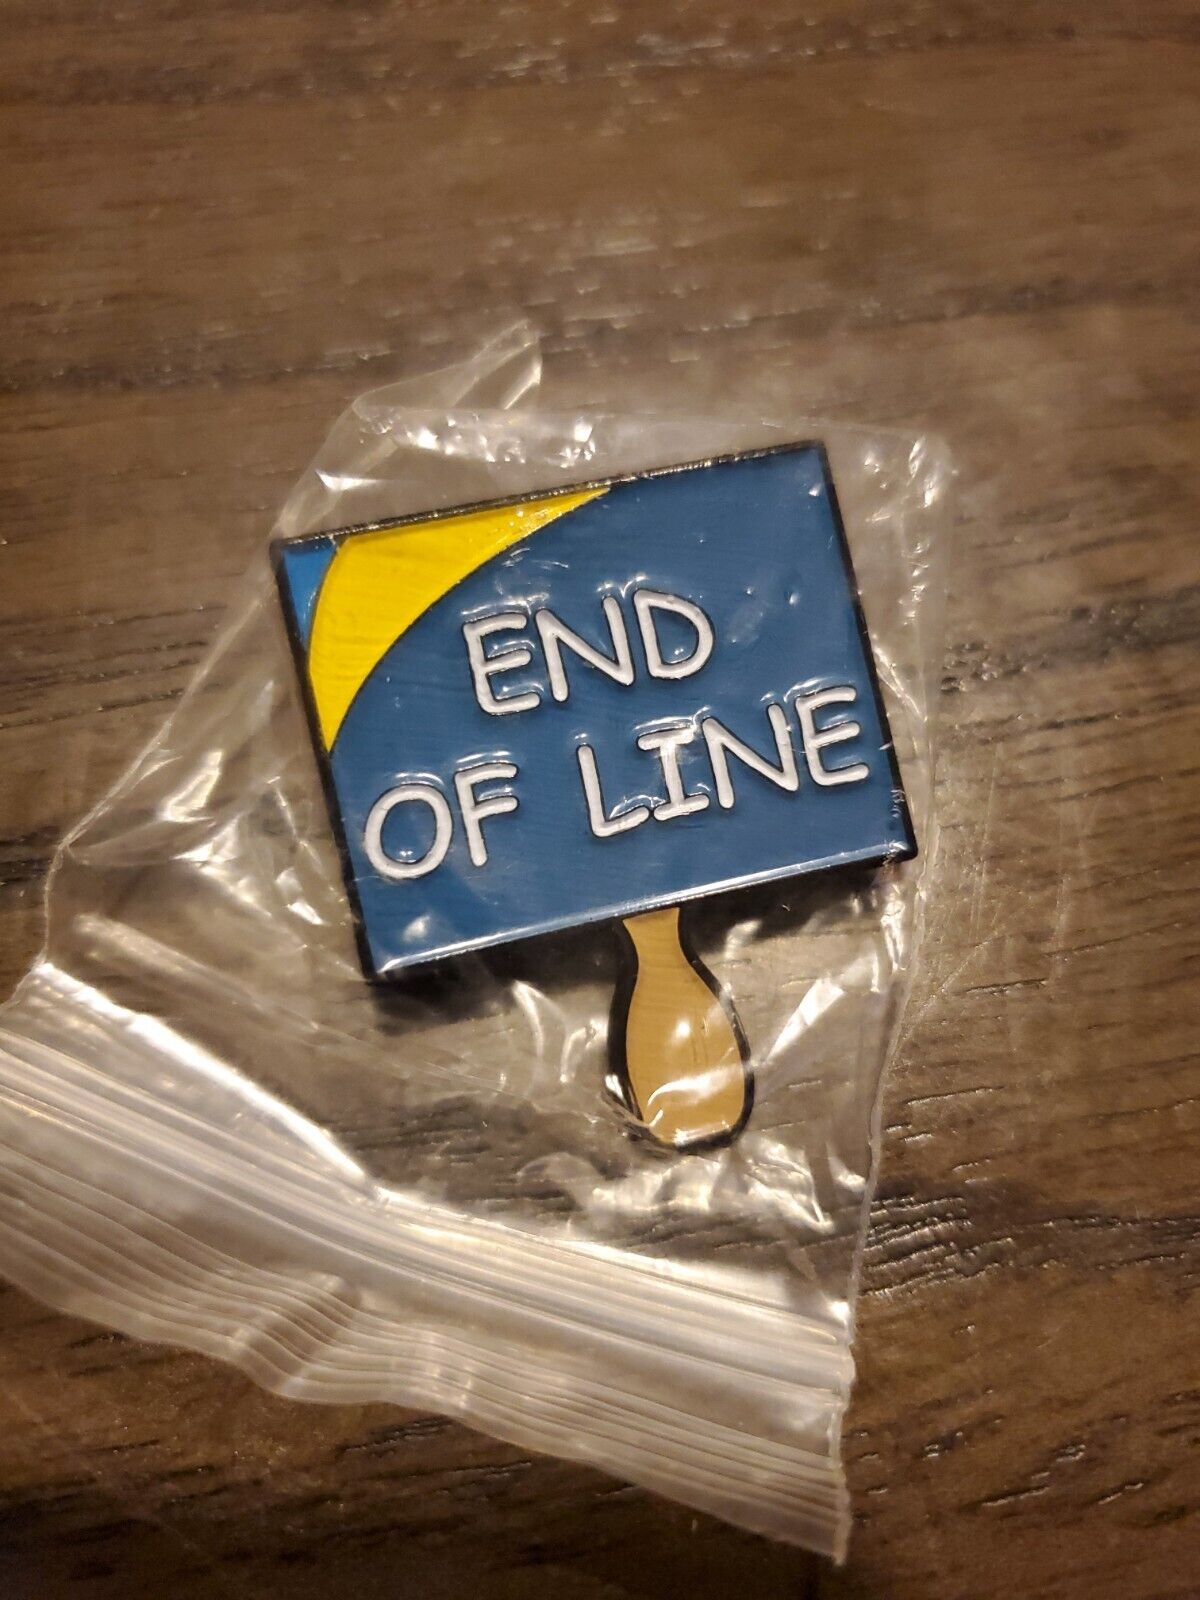 SDCC 2020 Comic Con International Limited Edition End Of Line Pin